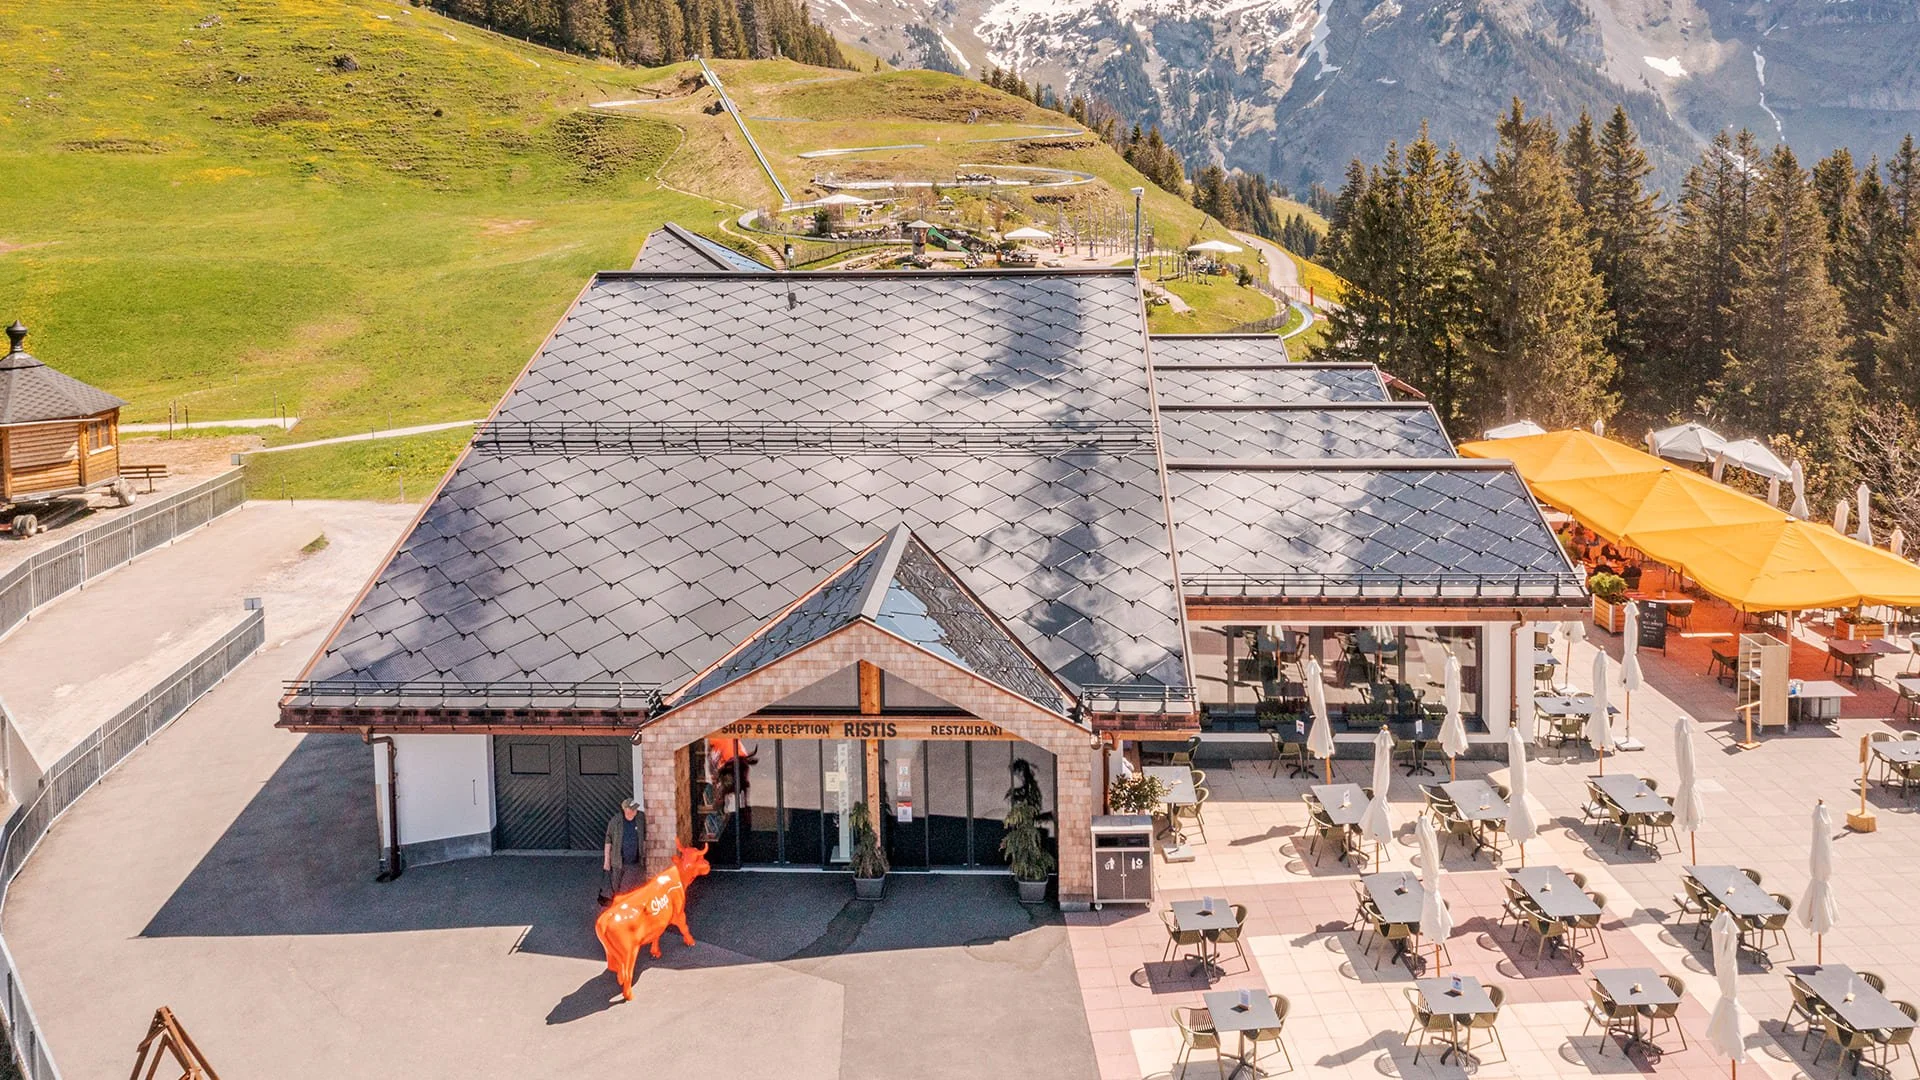 SunStyle Solar Tiles on Berglodge Restaurant Ristis allowing the lodge to be ecofriendly and generate power for the restaurant